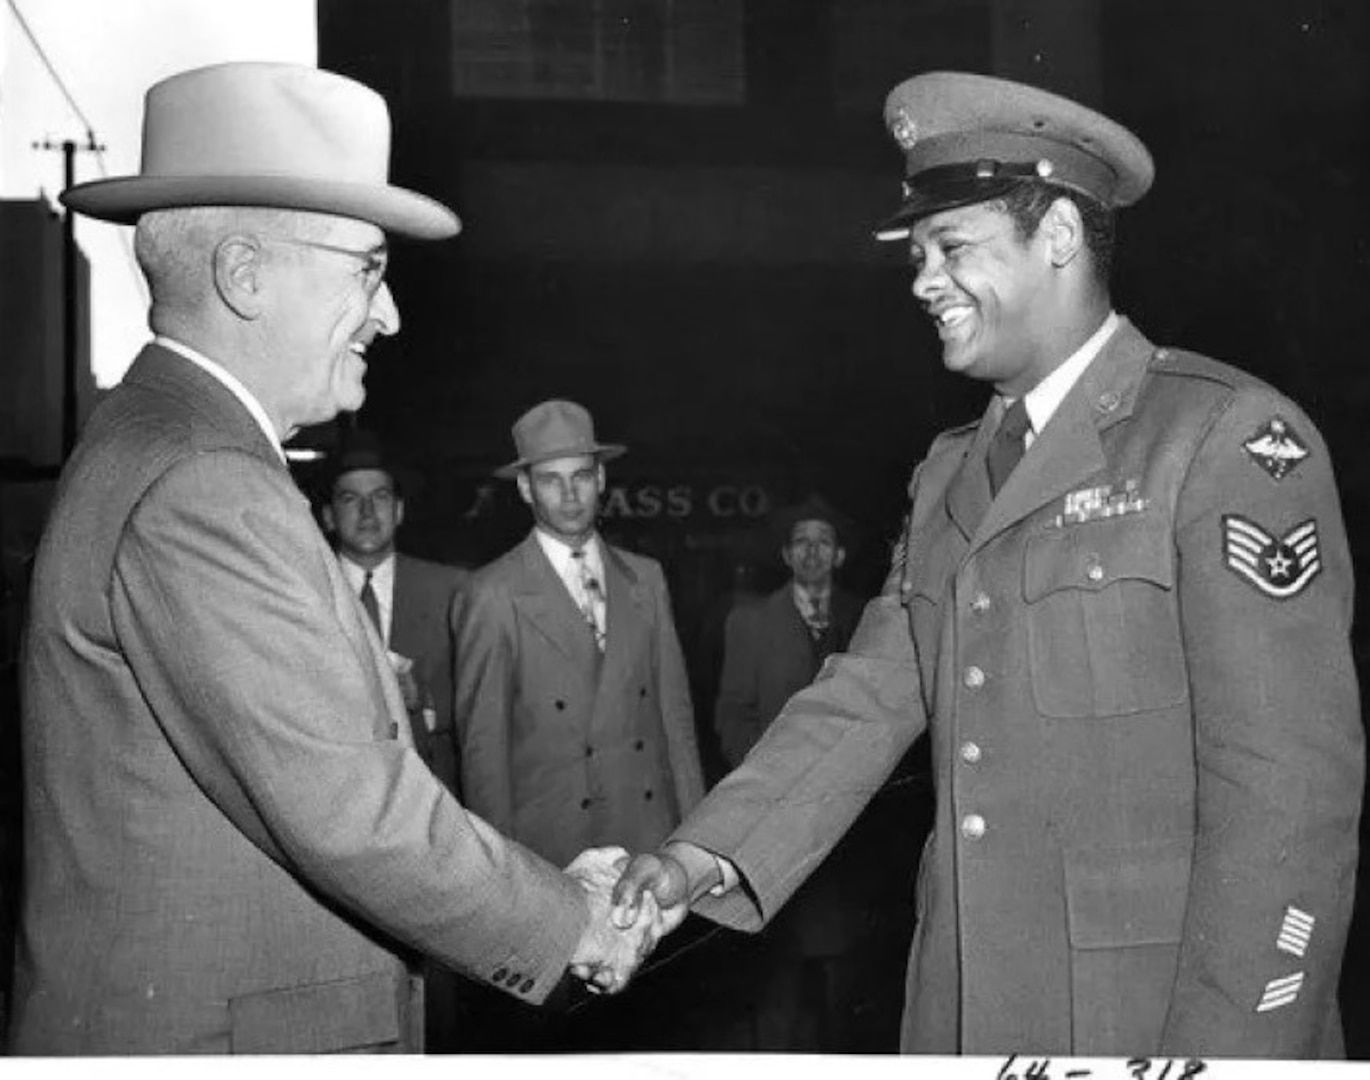 President Harry S. Truman shakes hands with U.S. Air Force Staff Sgt. Edward Williams on Oct. 13, 1950. Truman signed the executive order integrating the U.S. armed forces on July 26, 1948.